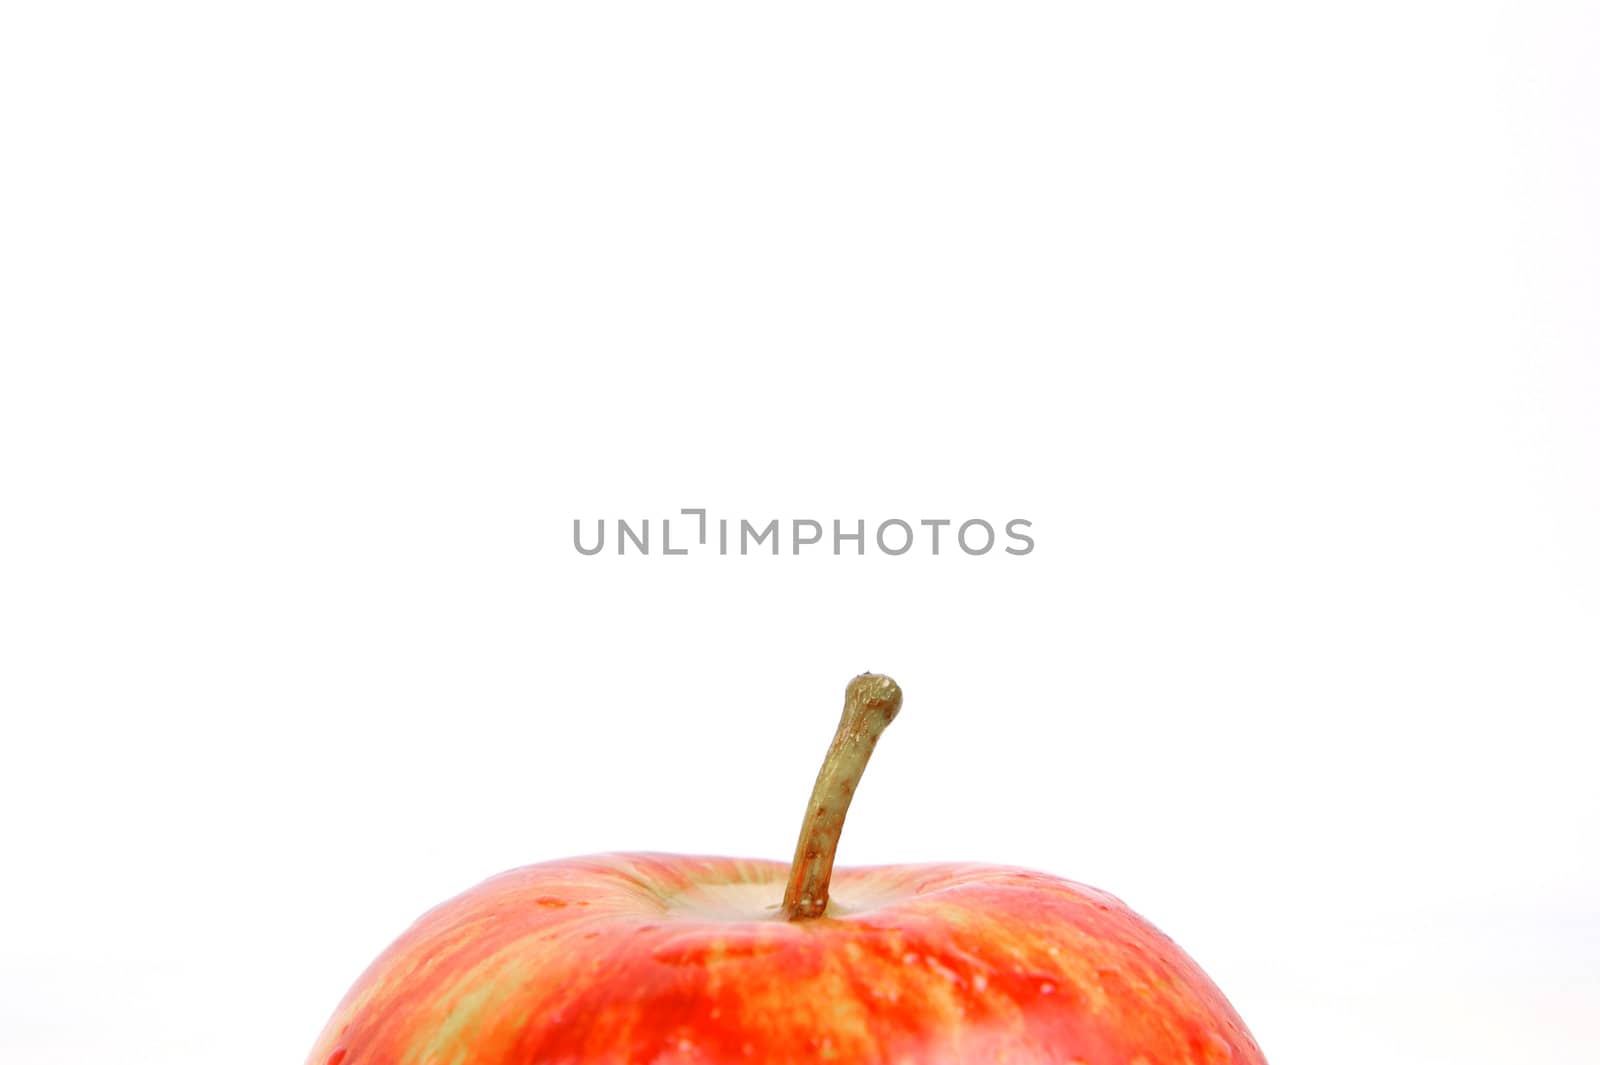 Red Apples by Kitch